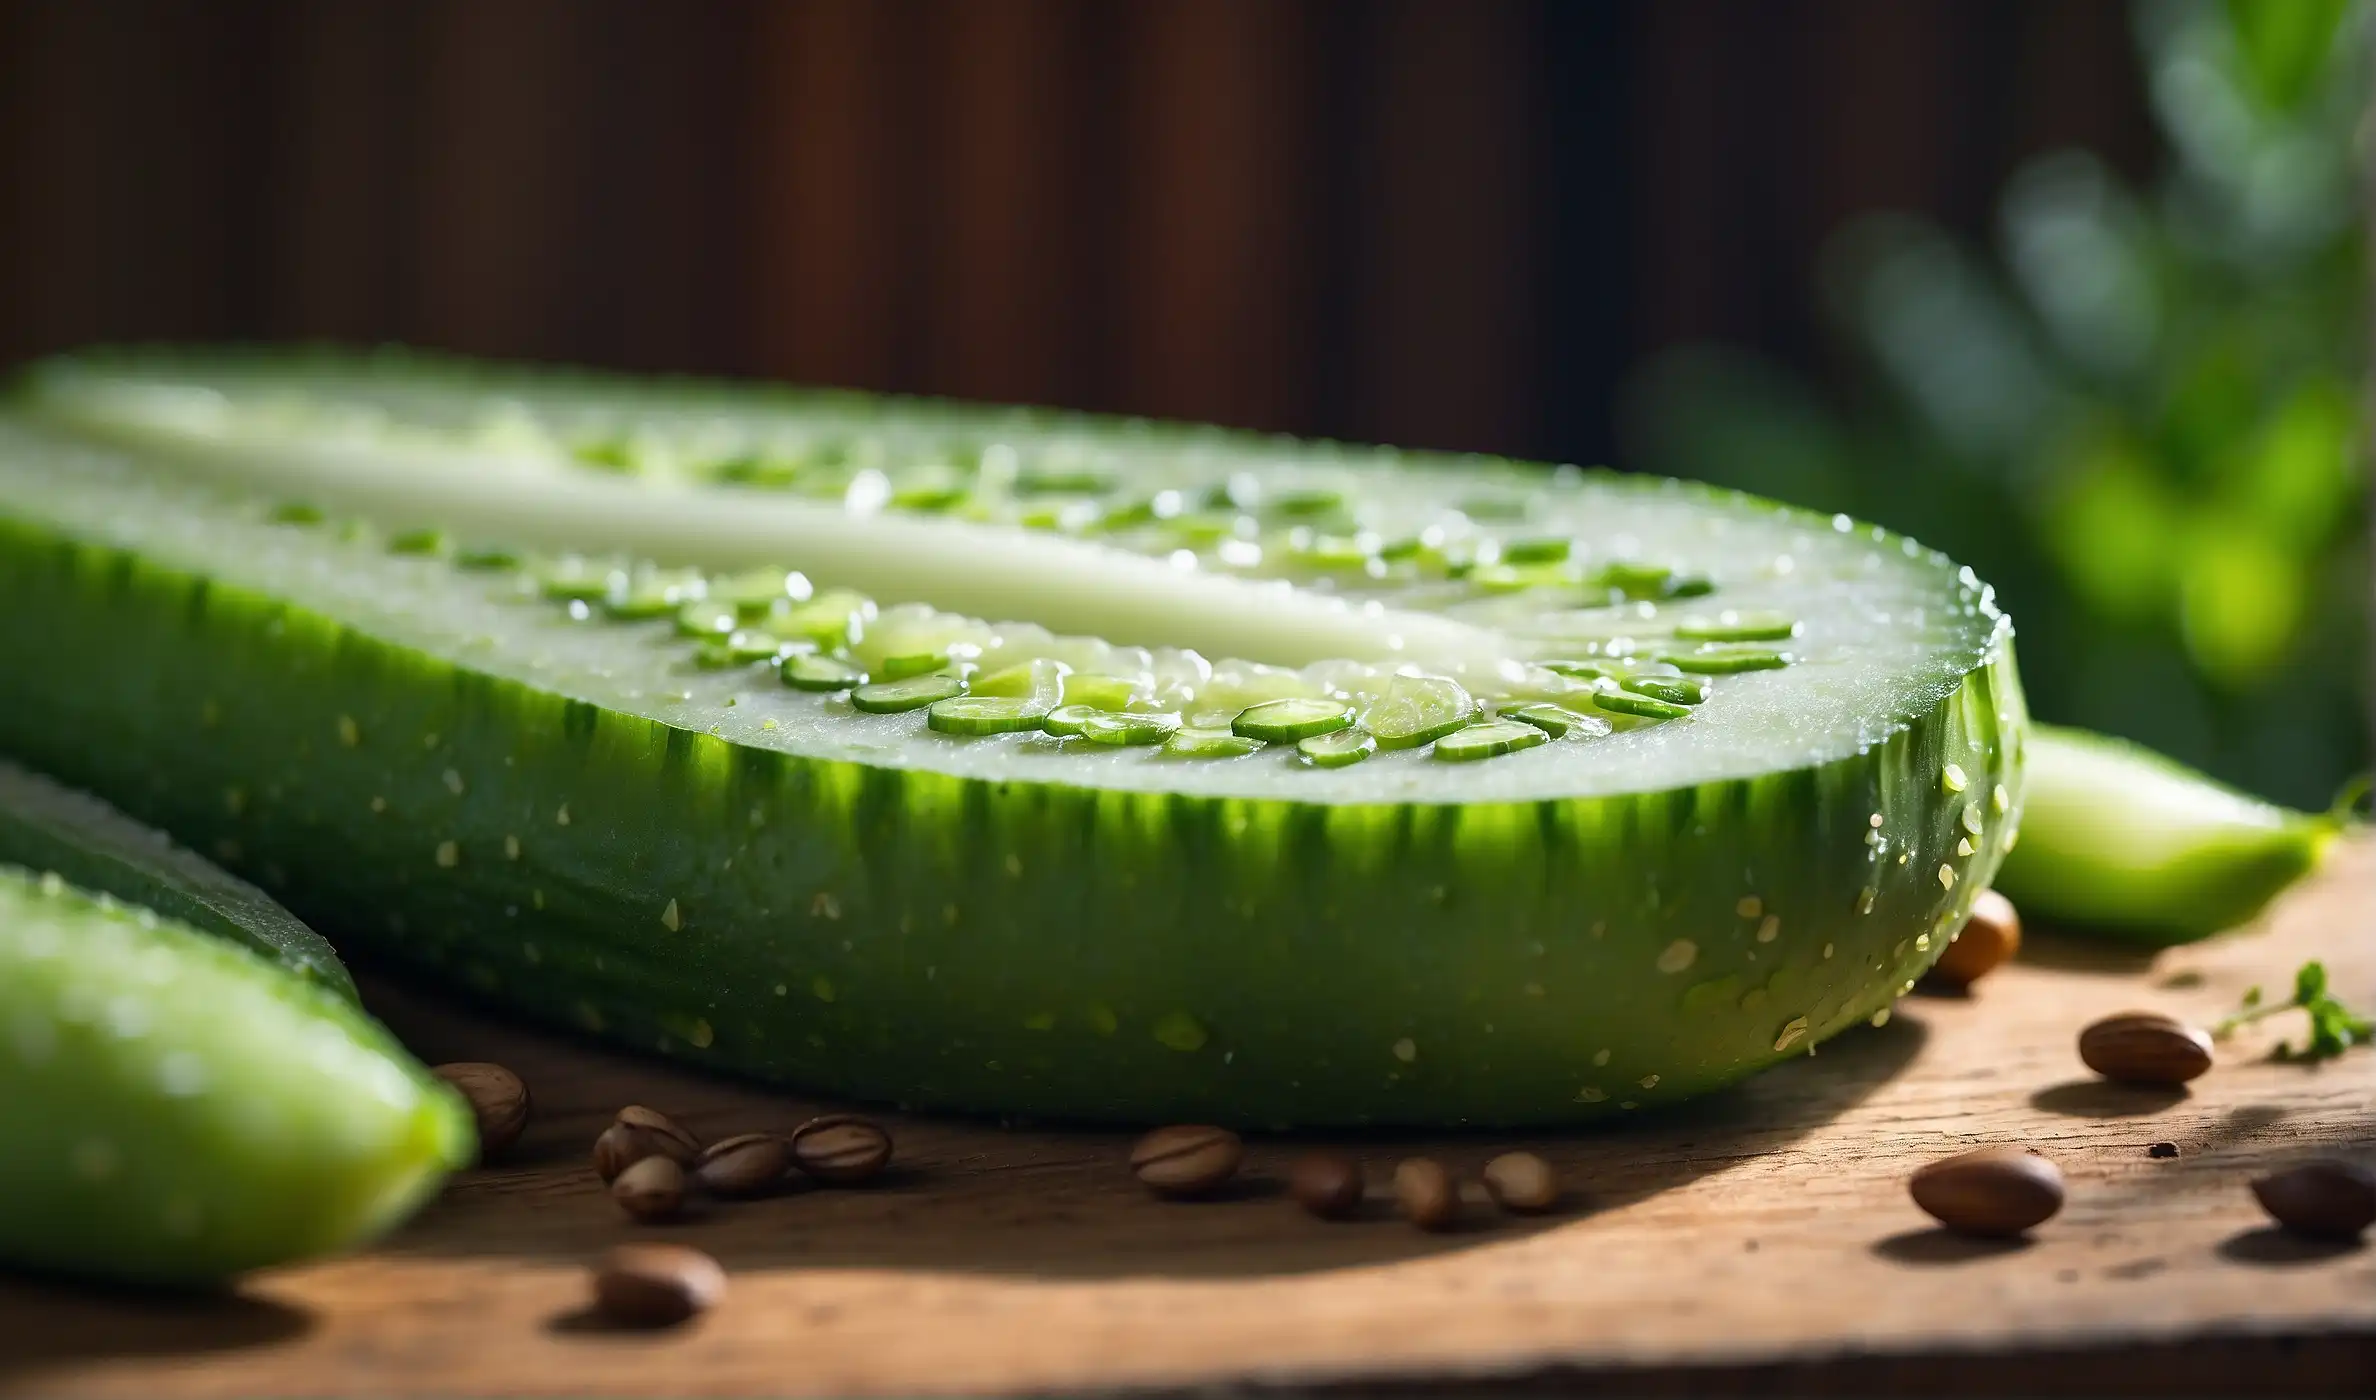 Cucumber slice on a wooden table